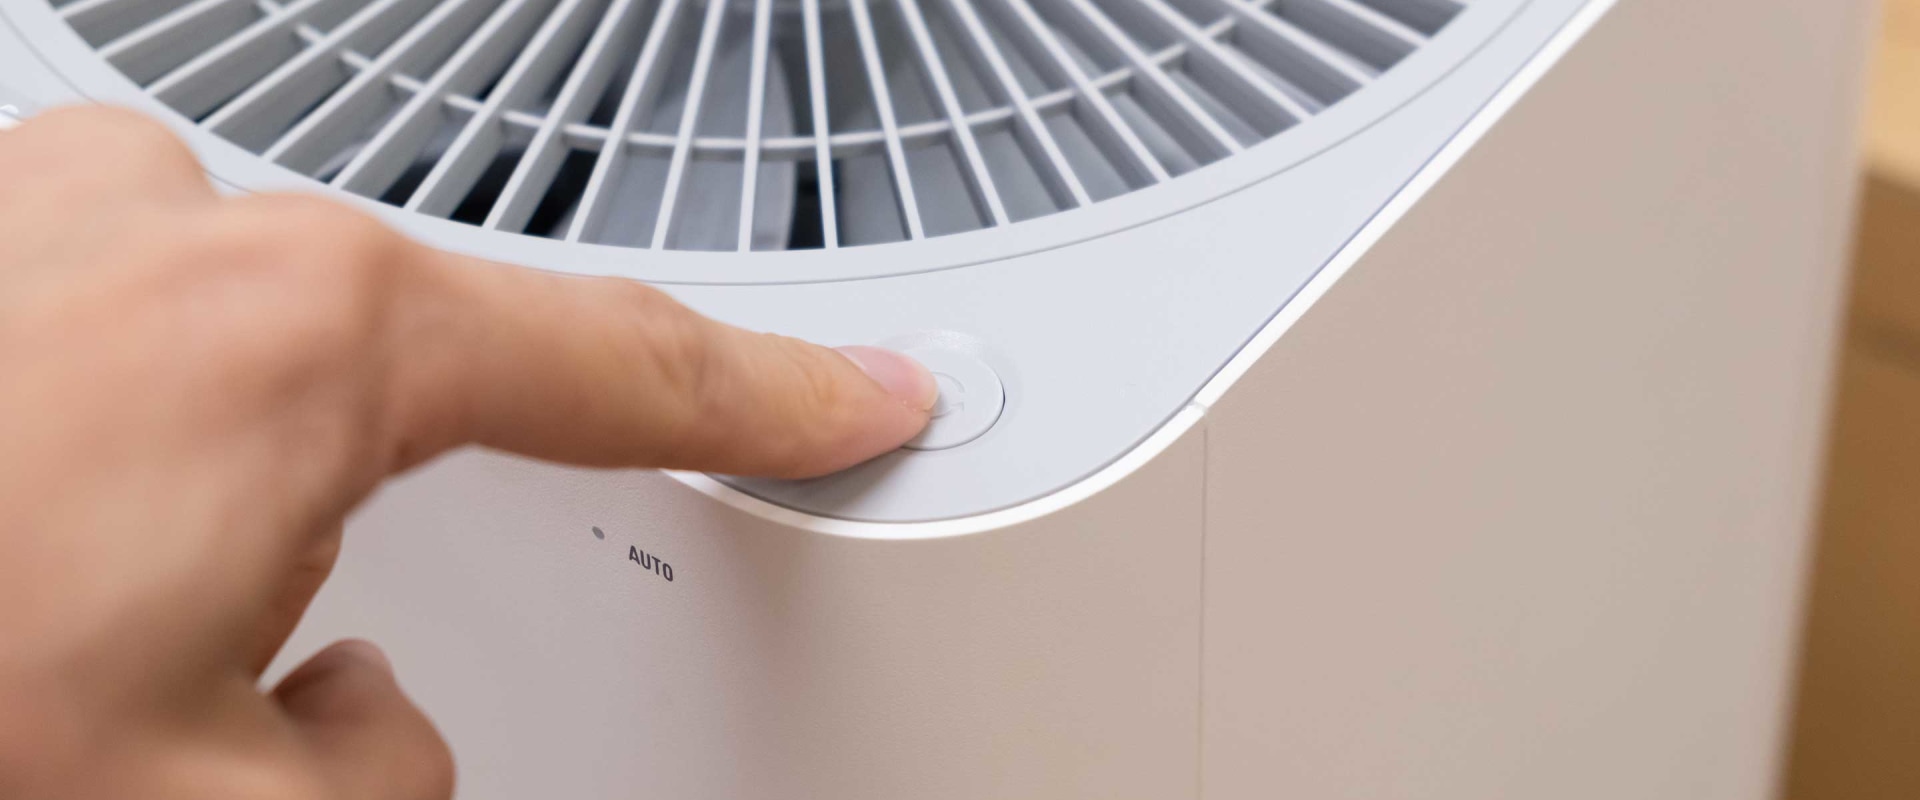 Do Air Purifiers with HEPA Filters Produce Ozone? - A Comprehensive Guide